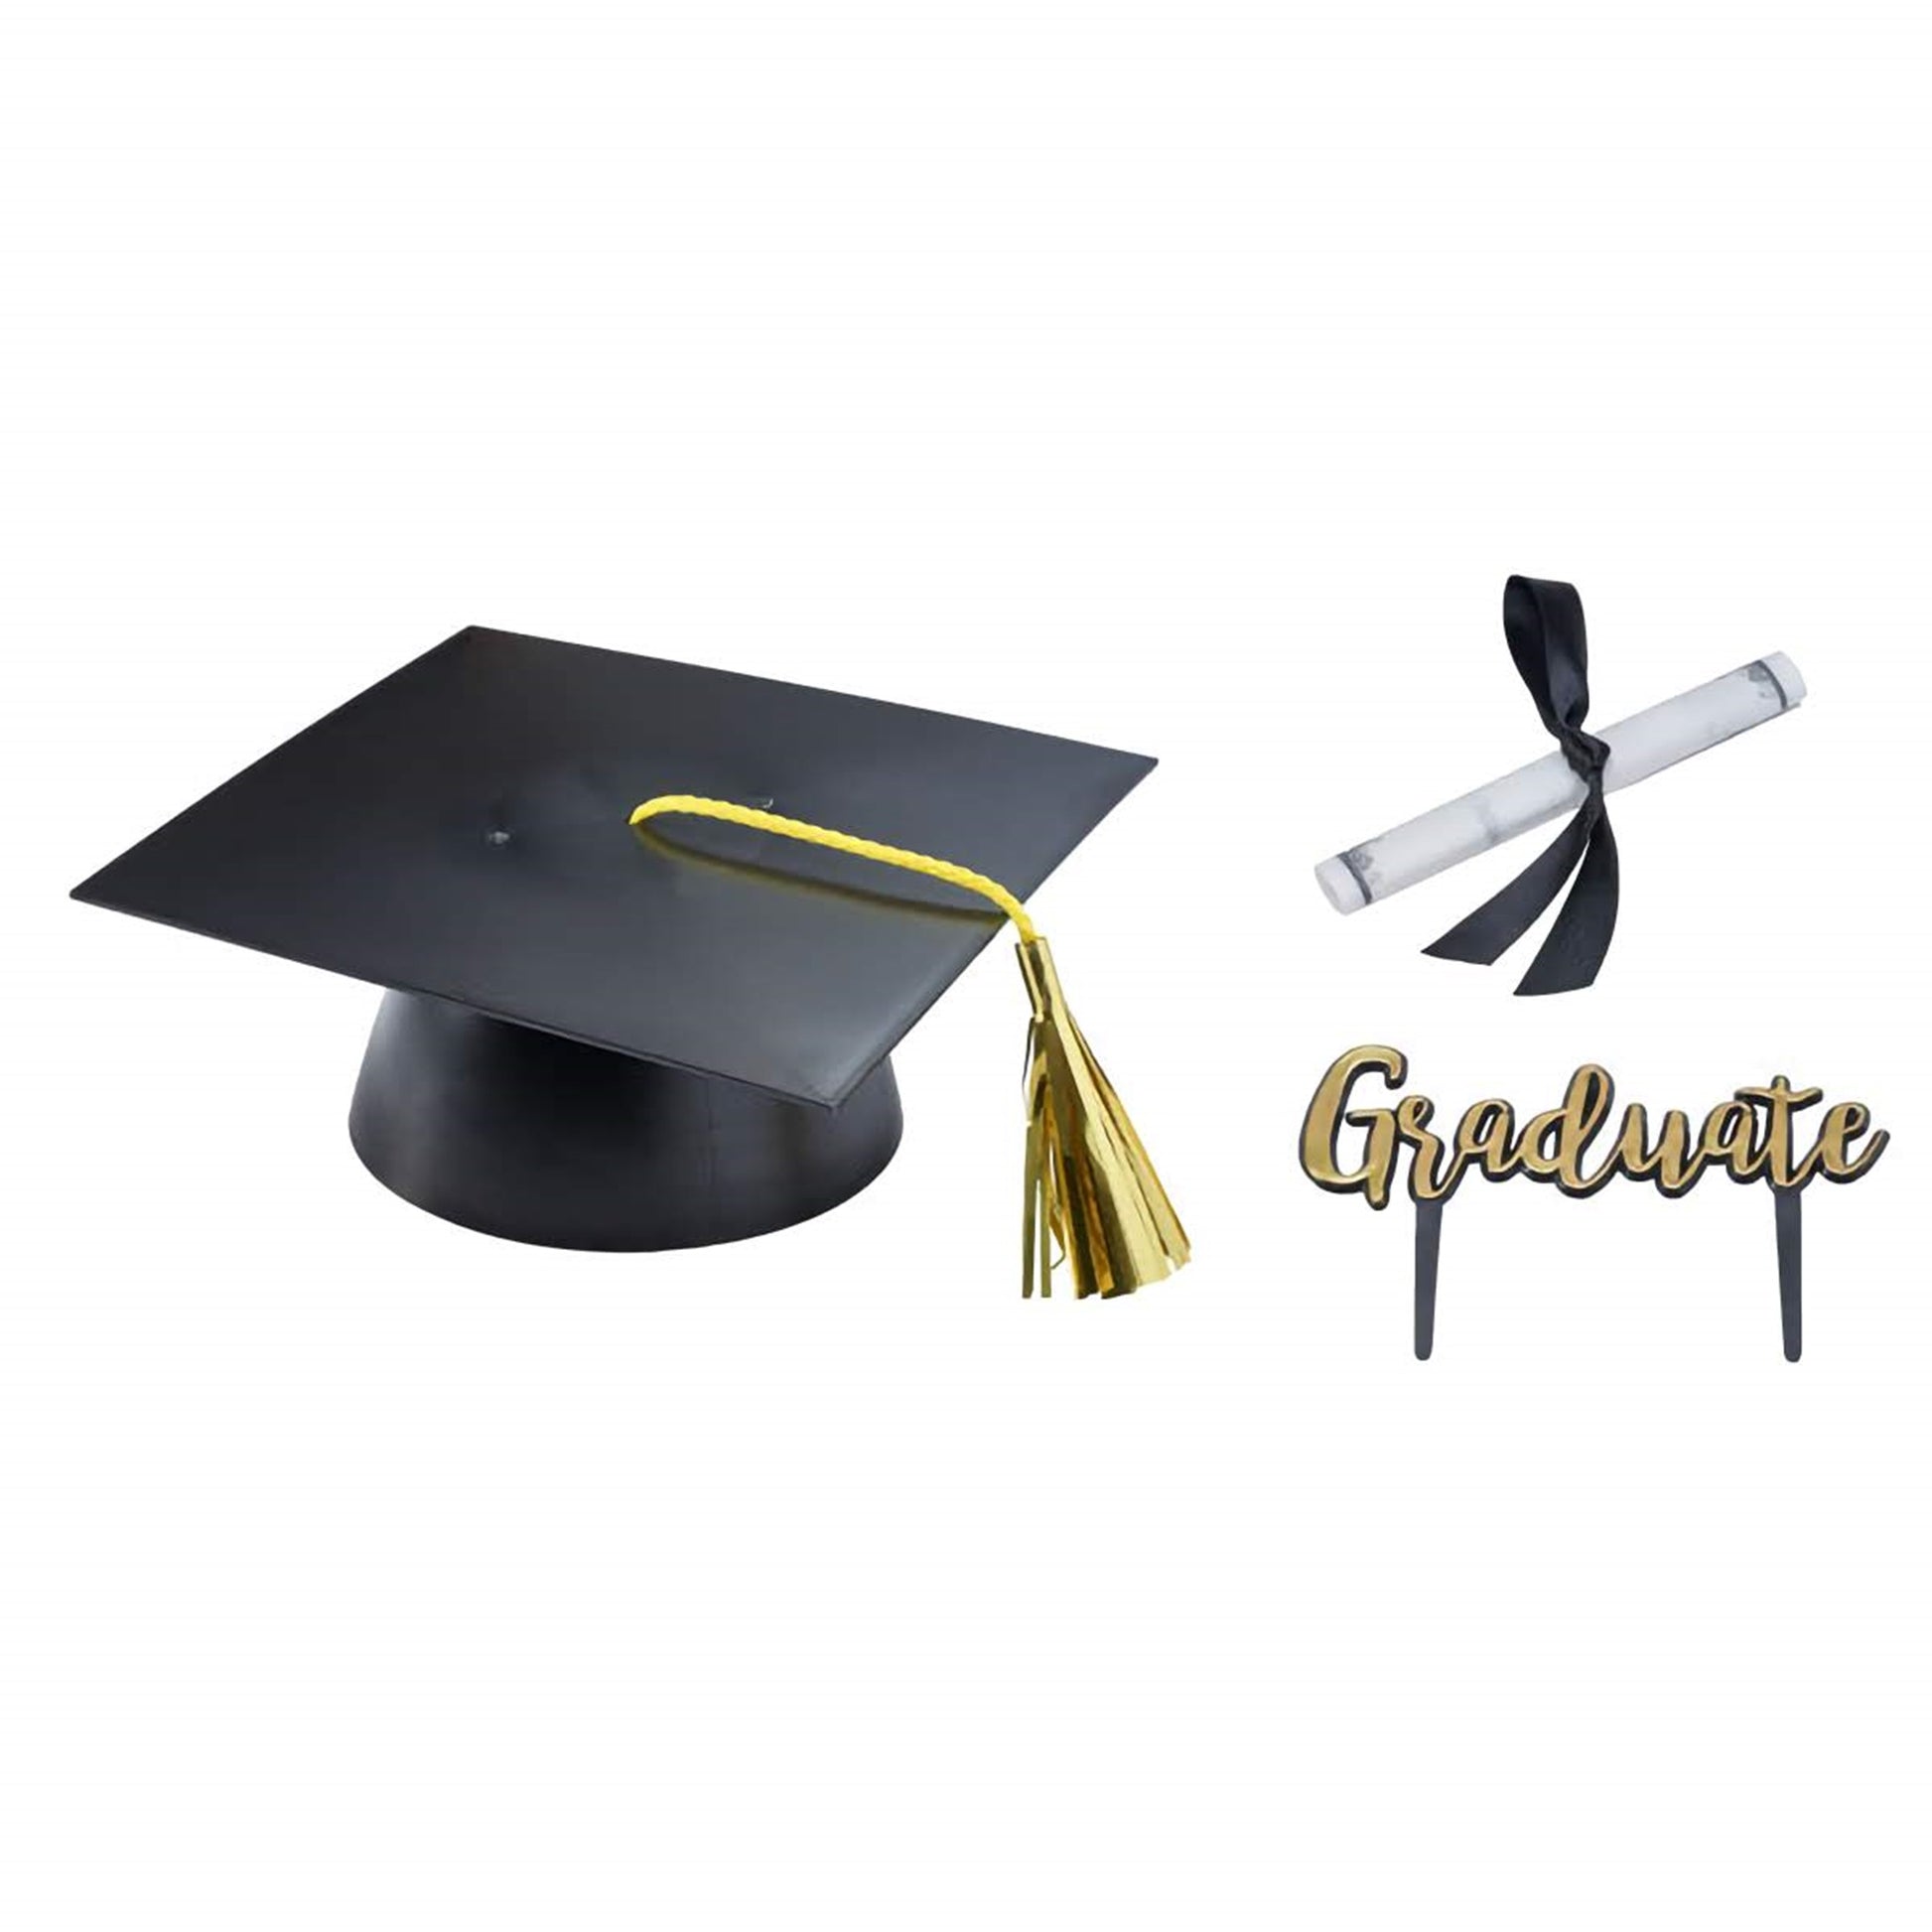 Set of graduation cake decorations featuring a large, flat, black mortarboard with a yellow tassel, a rolled diploma with a black ribbon, and a golden 'Graduate' text topper, perfect for adorning a graduation-themed cake.